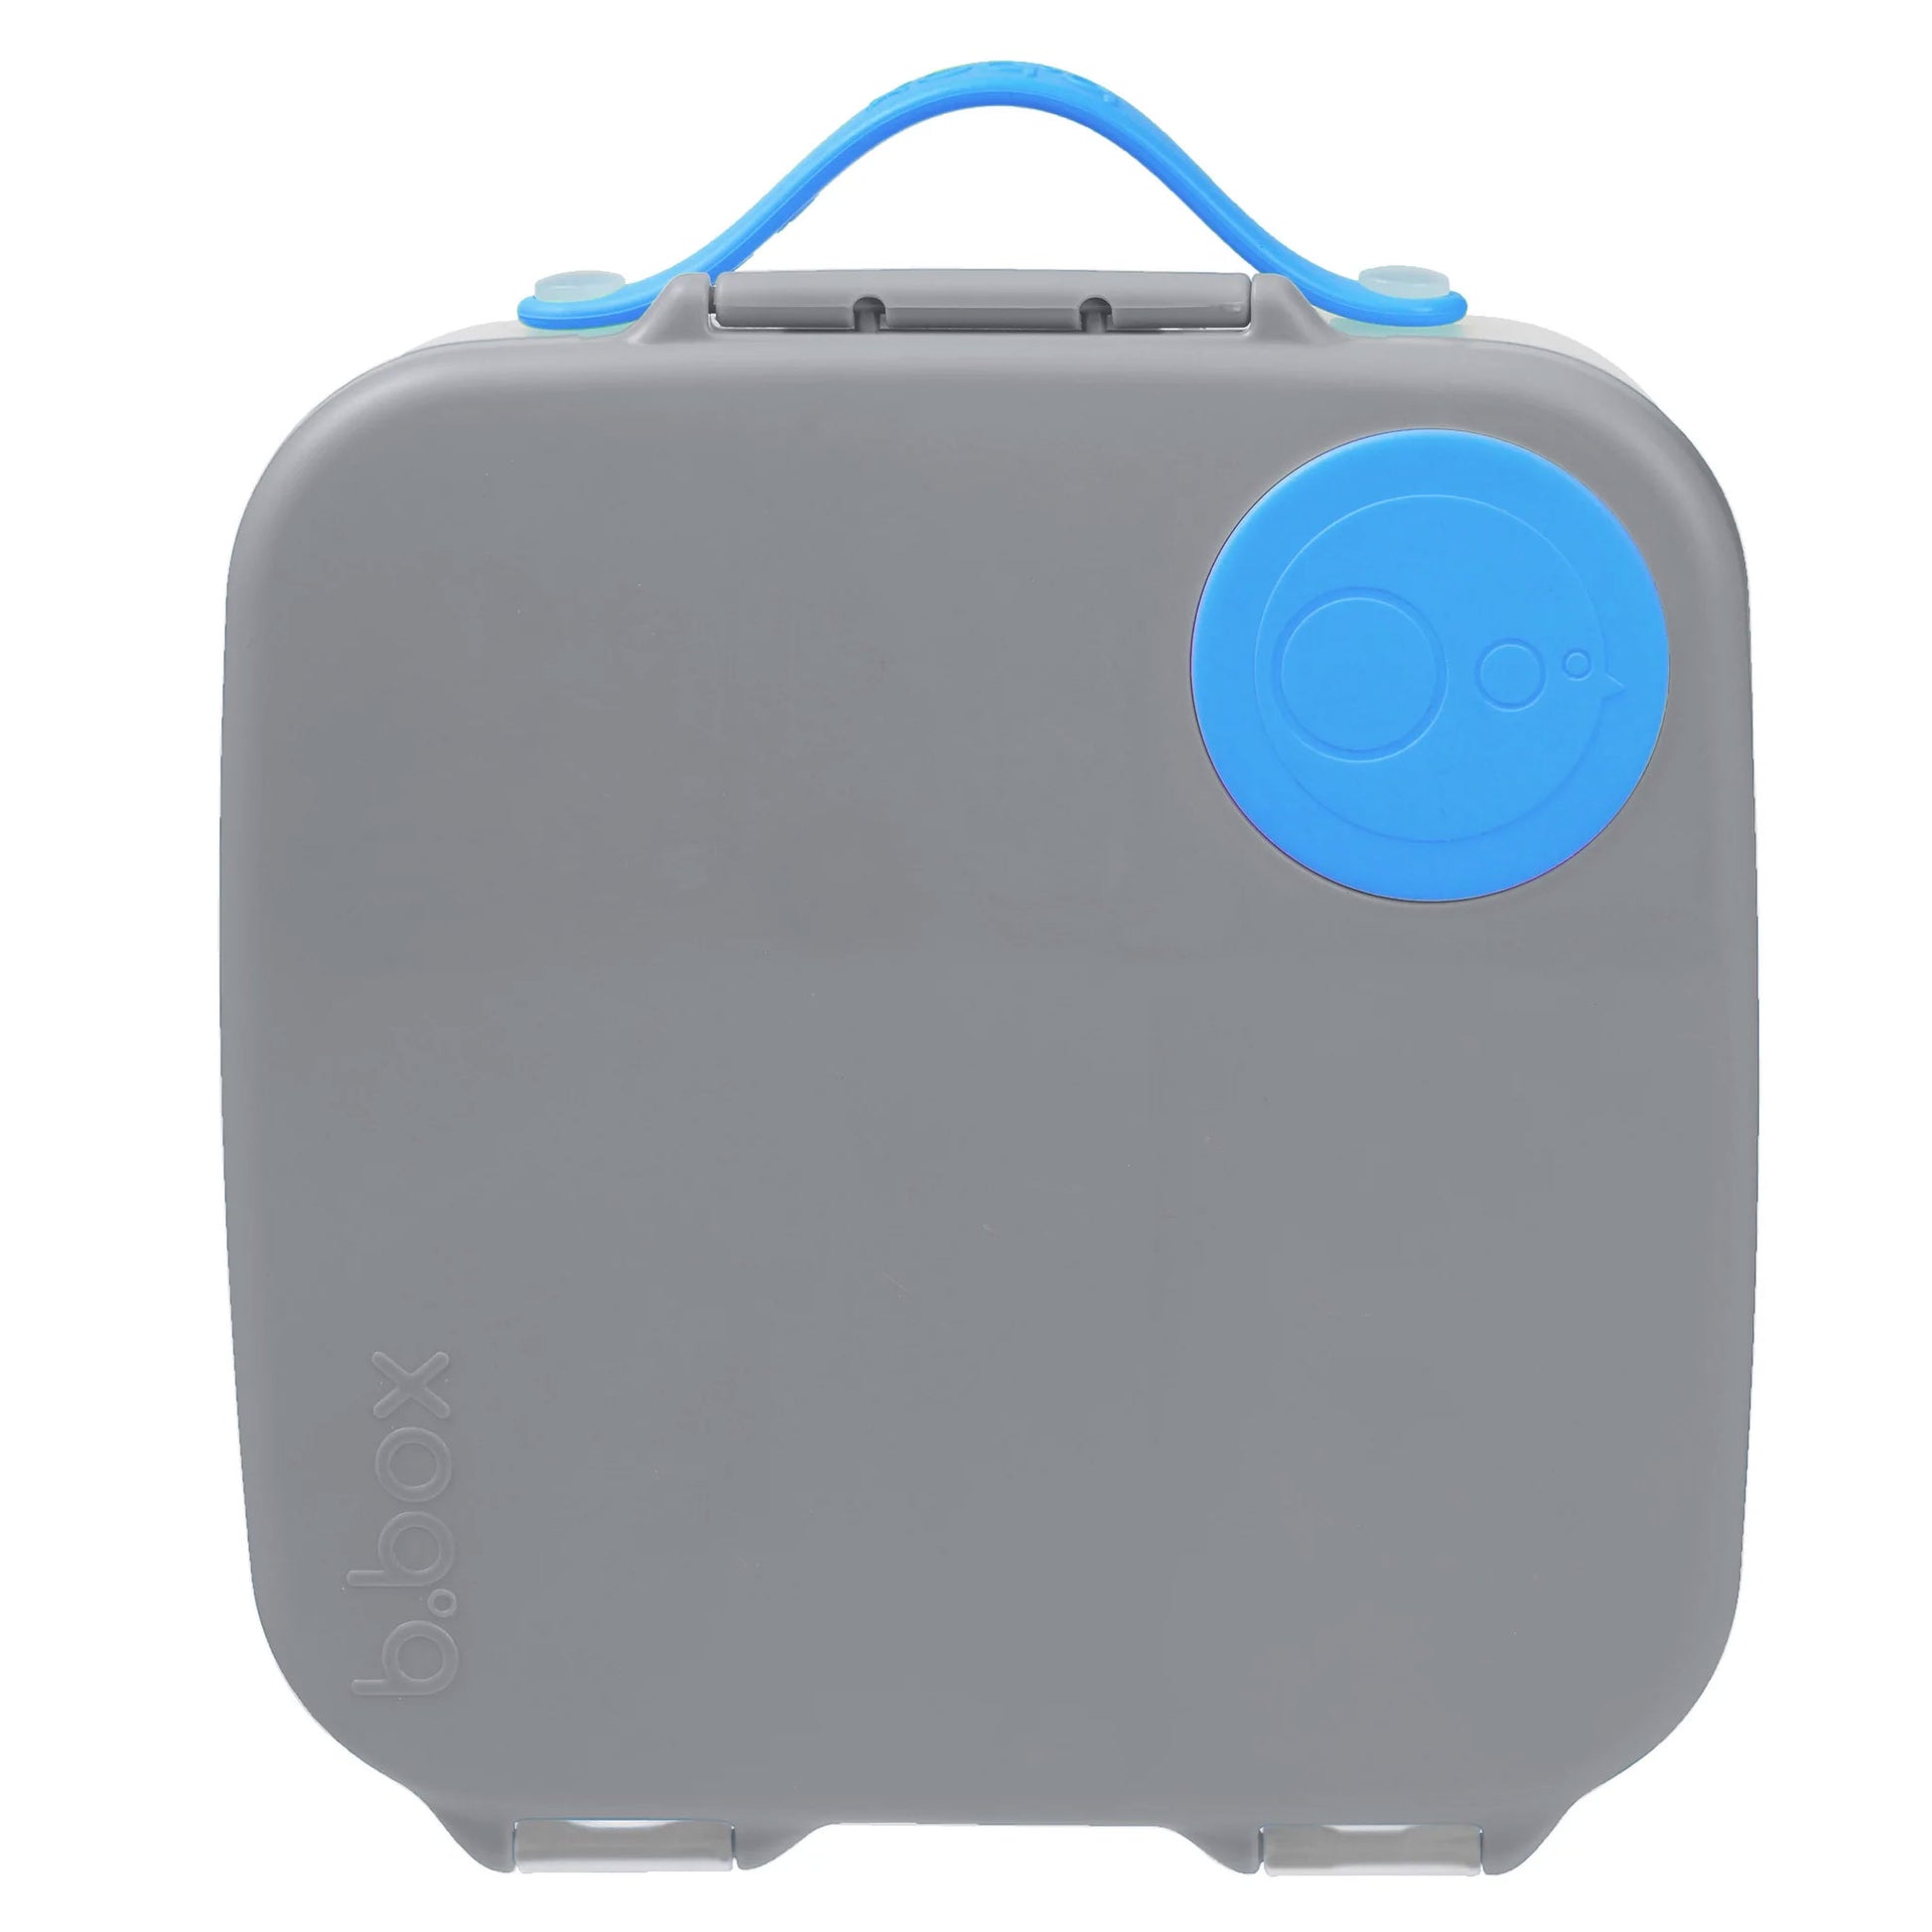 b.box Lunch Box with separated compartments. Made of silicone and PP which is safe. BPS, PVC, BPA and Phthalate free. Features gel cooler pack to help keep food cooler and fresher for longer.